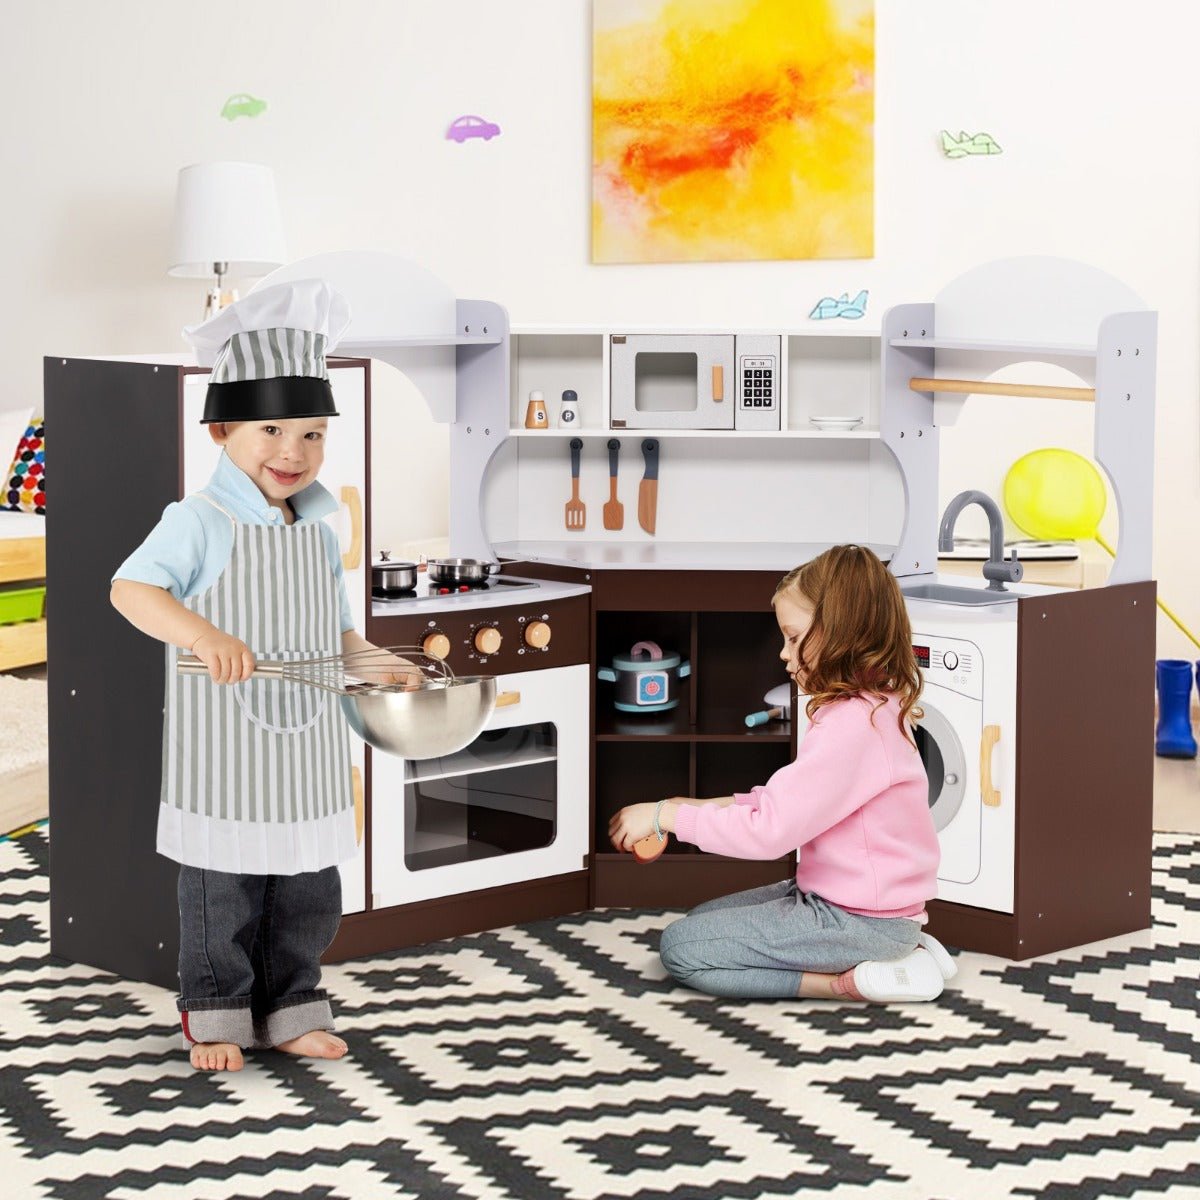 Toy Kitchen with Washing Machine - Classic Brown